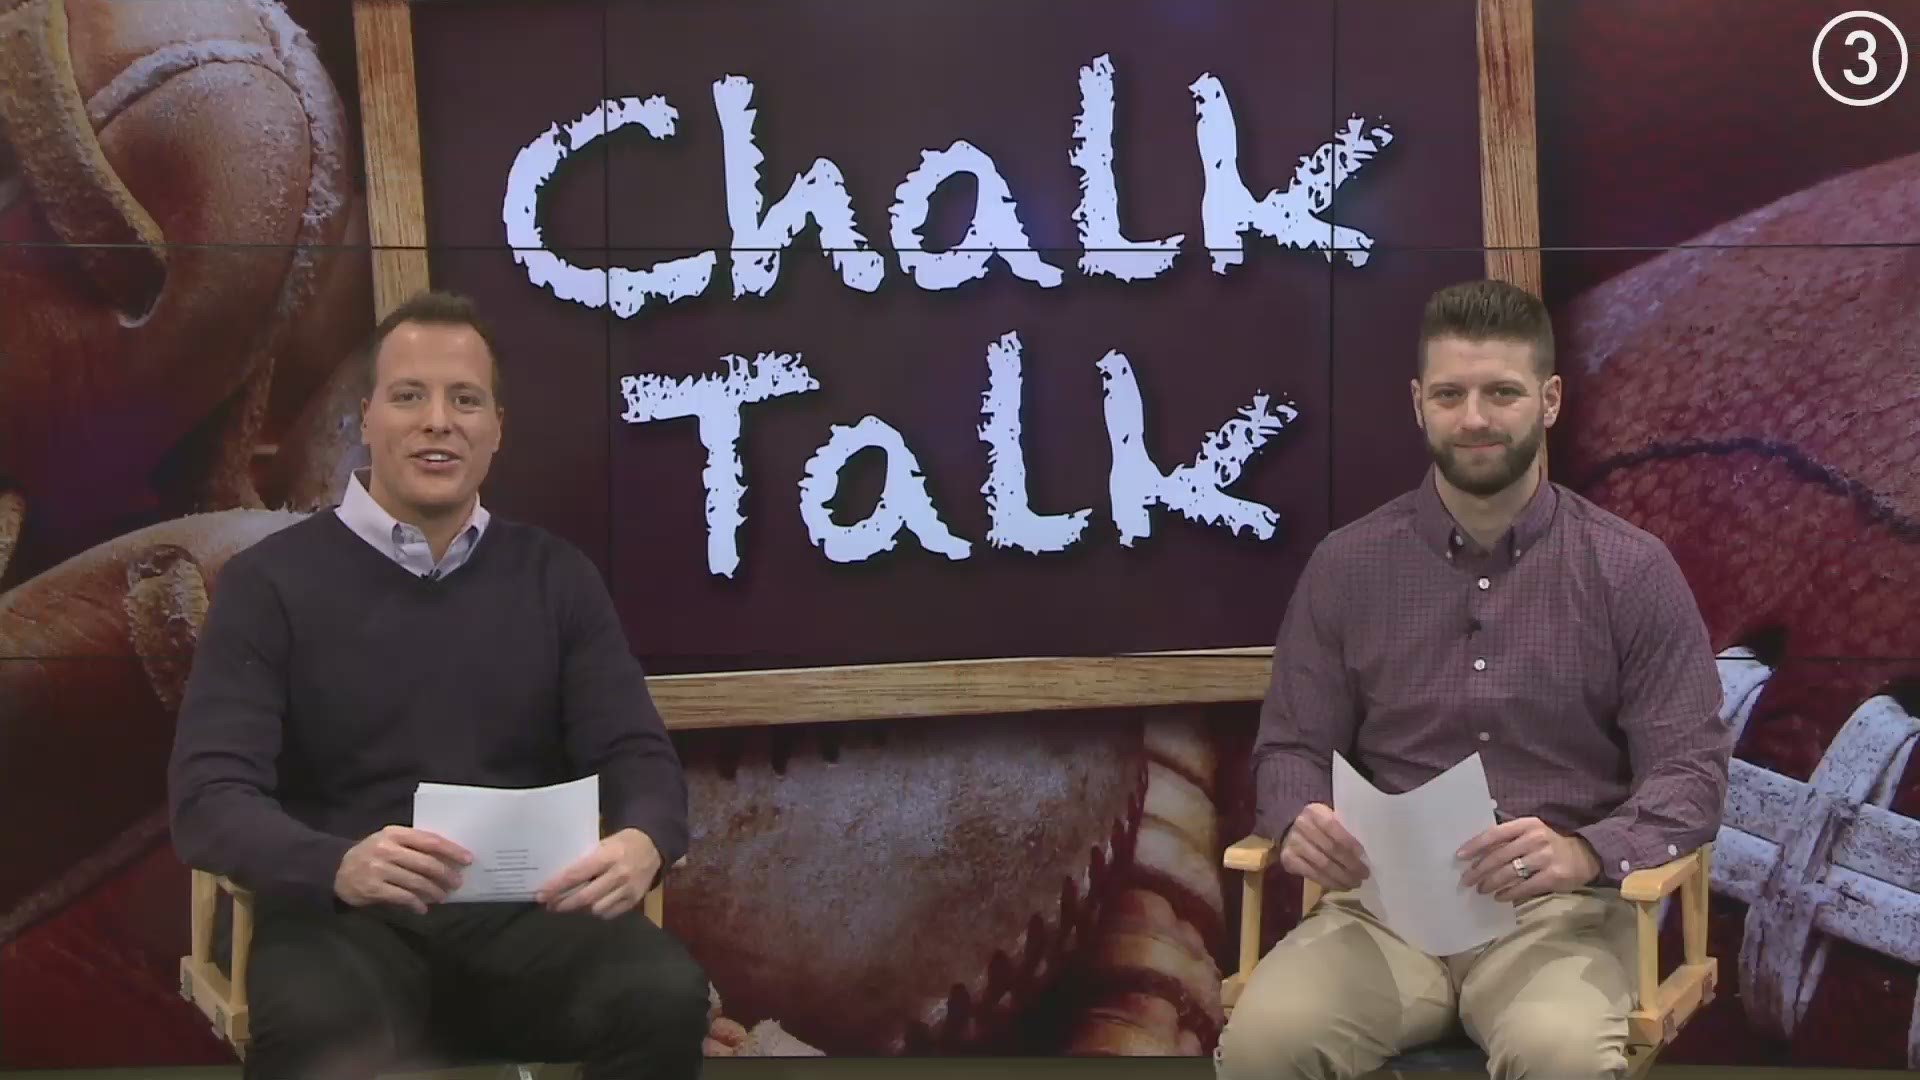 On the 13th episode of WKYC's Chalk Talk, Nick Camino and Ben Axelrod discuss and make their picks for Week 14 of the college football season and Week 13 of the NFL.